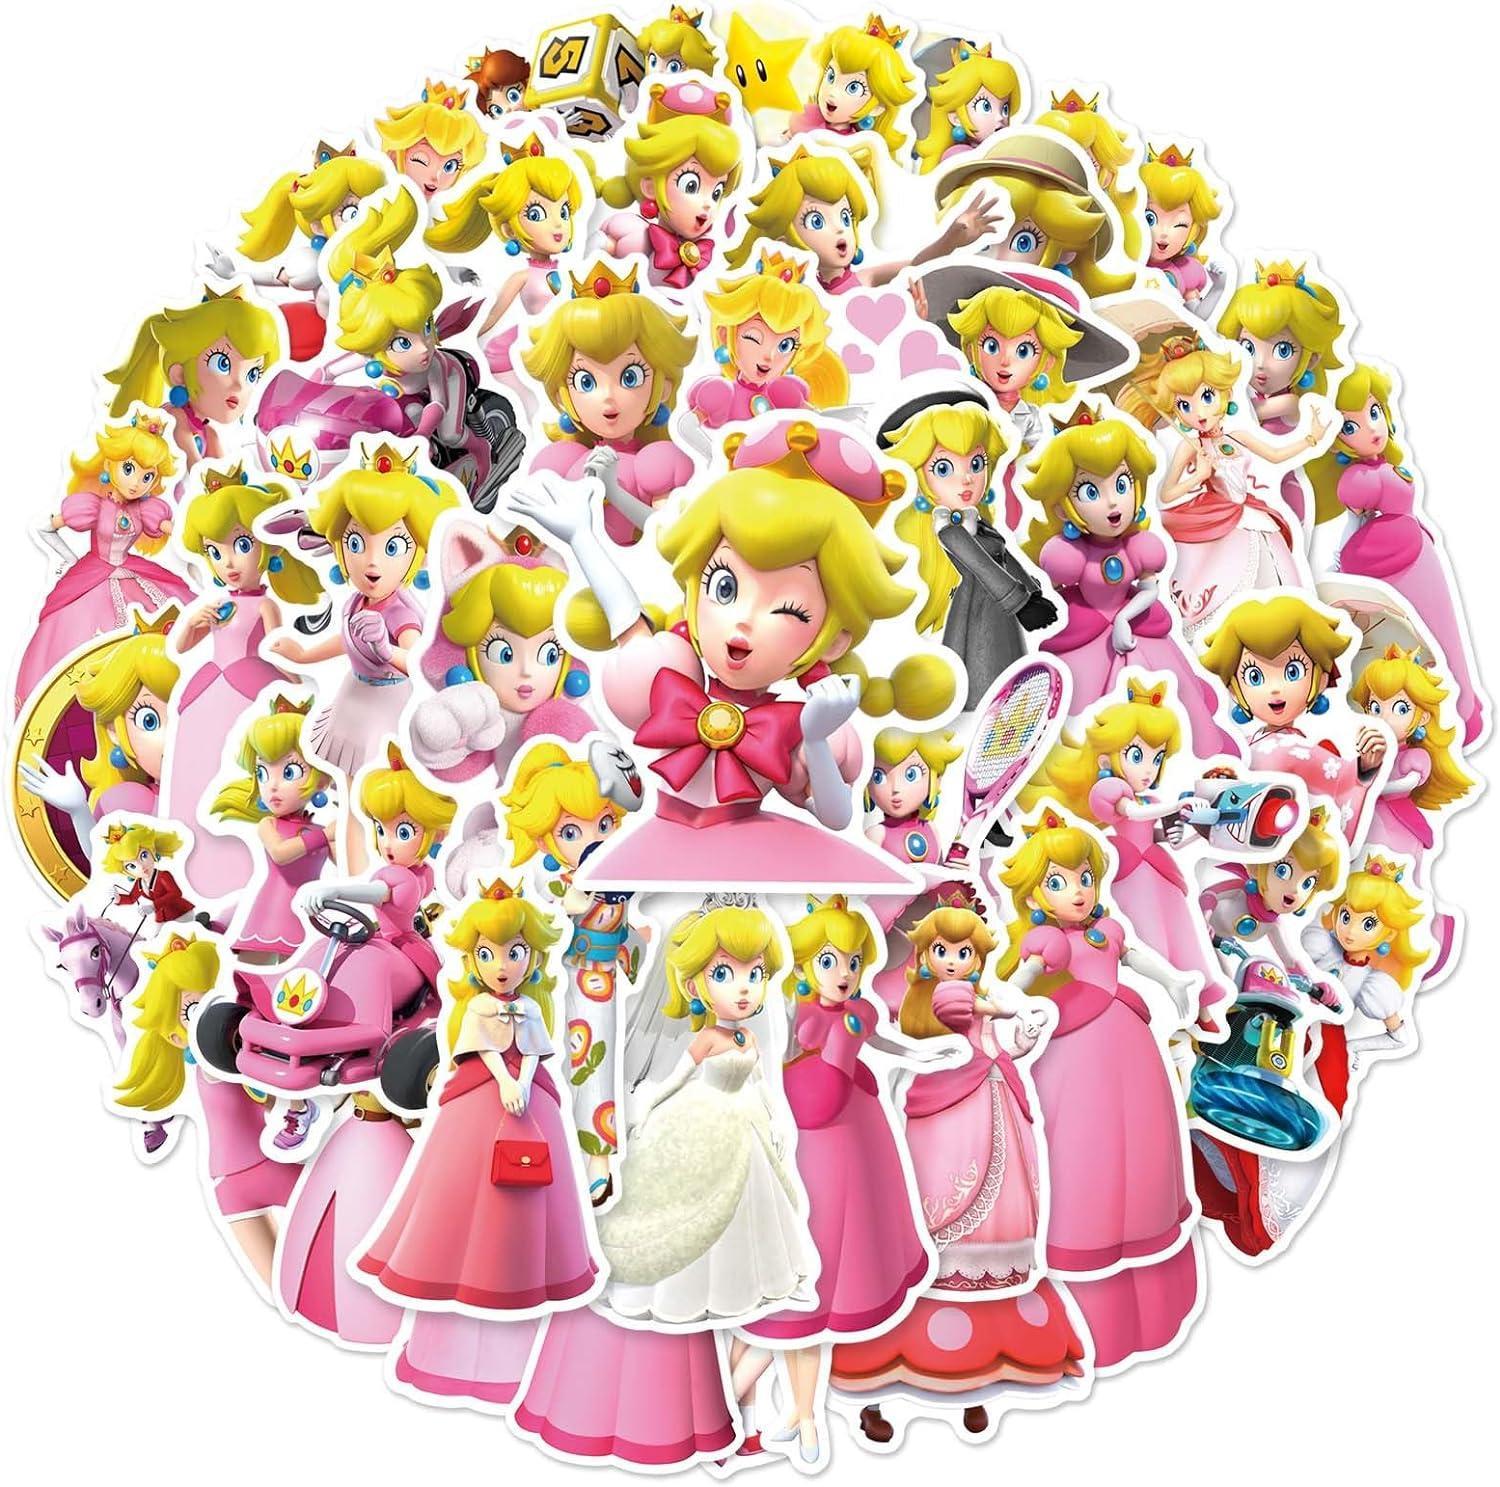 Super Princess Peach Stickers for Girl NDS Game Stickers for Kids Laptop Water Bottles Bicycle Skateboard Luggage Decal for Teens (S Peach)